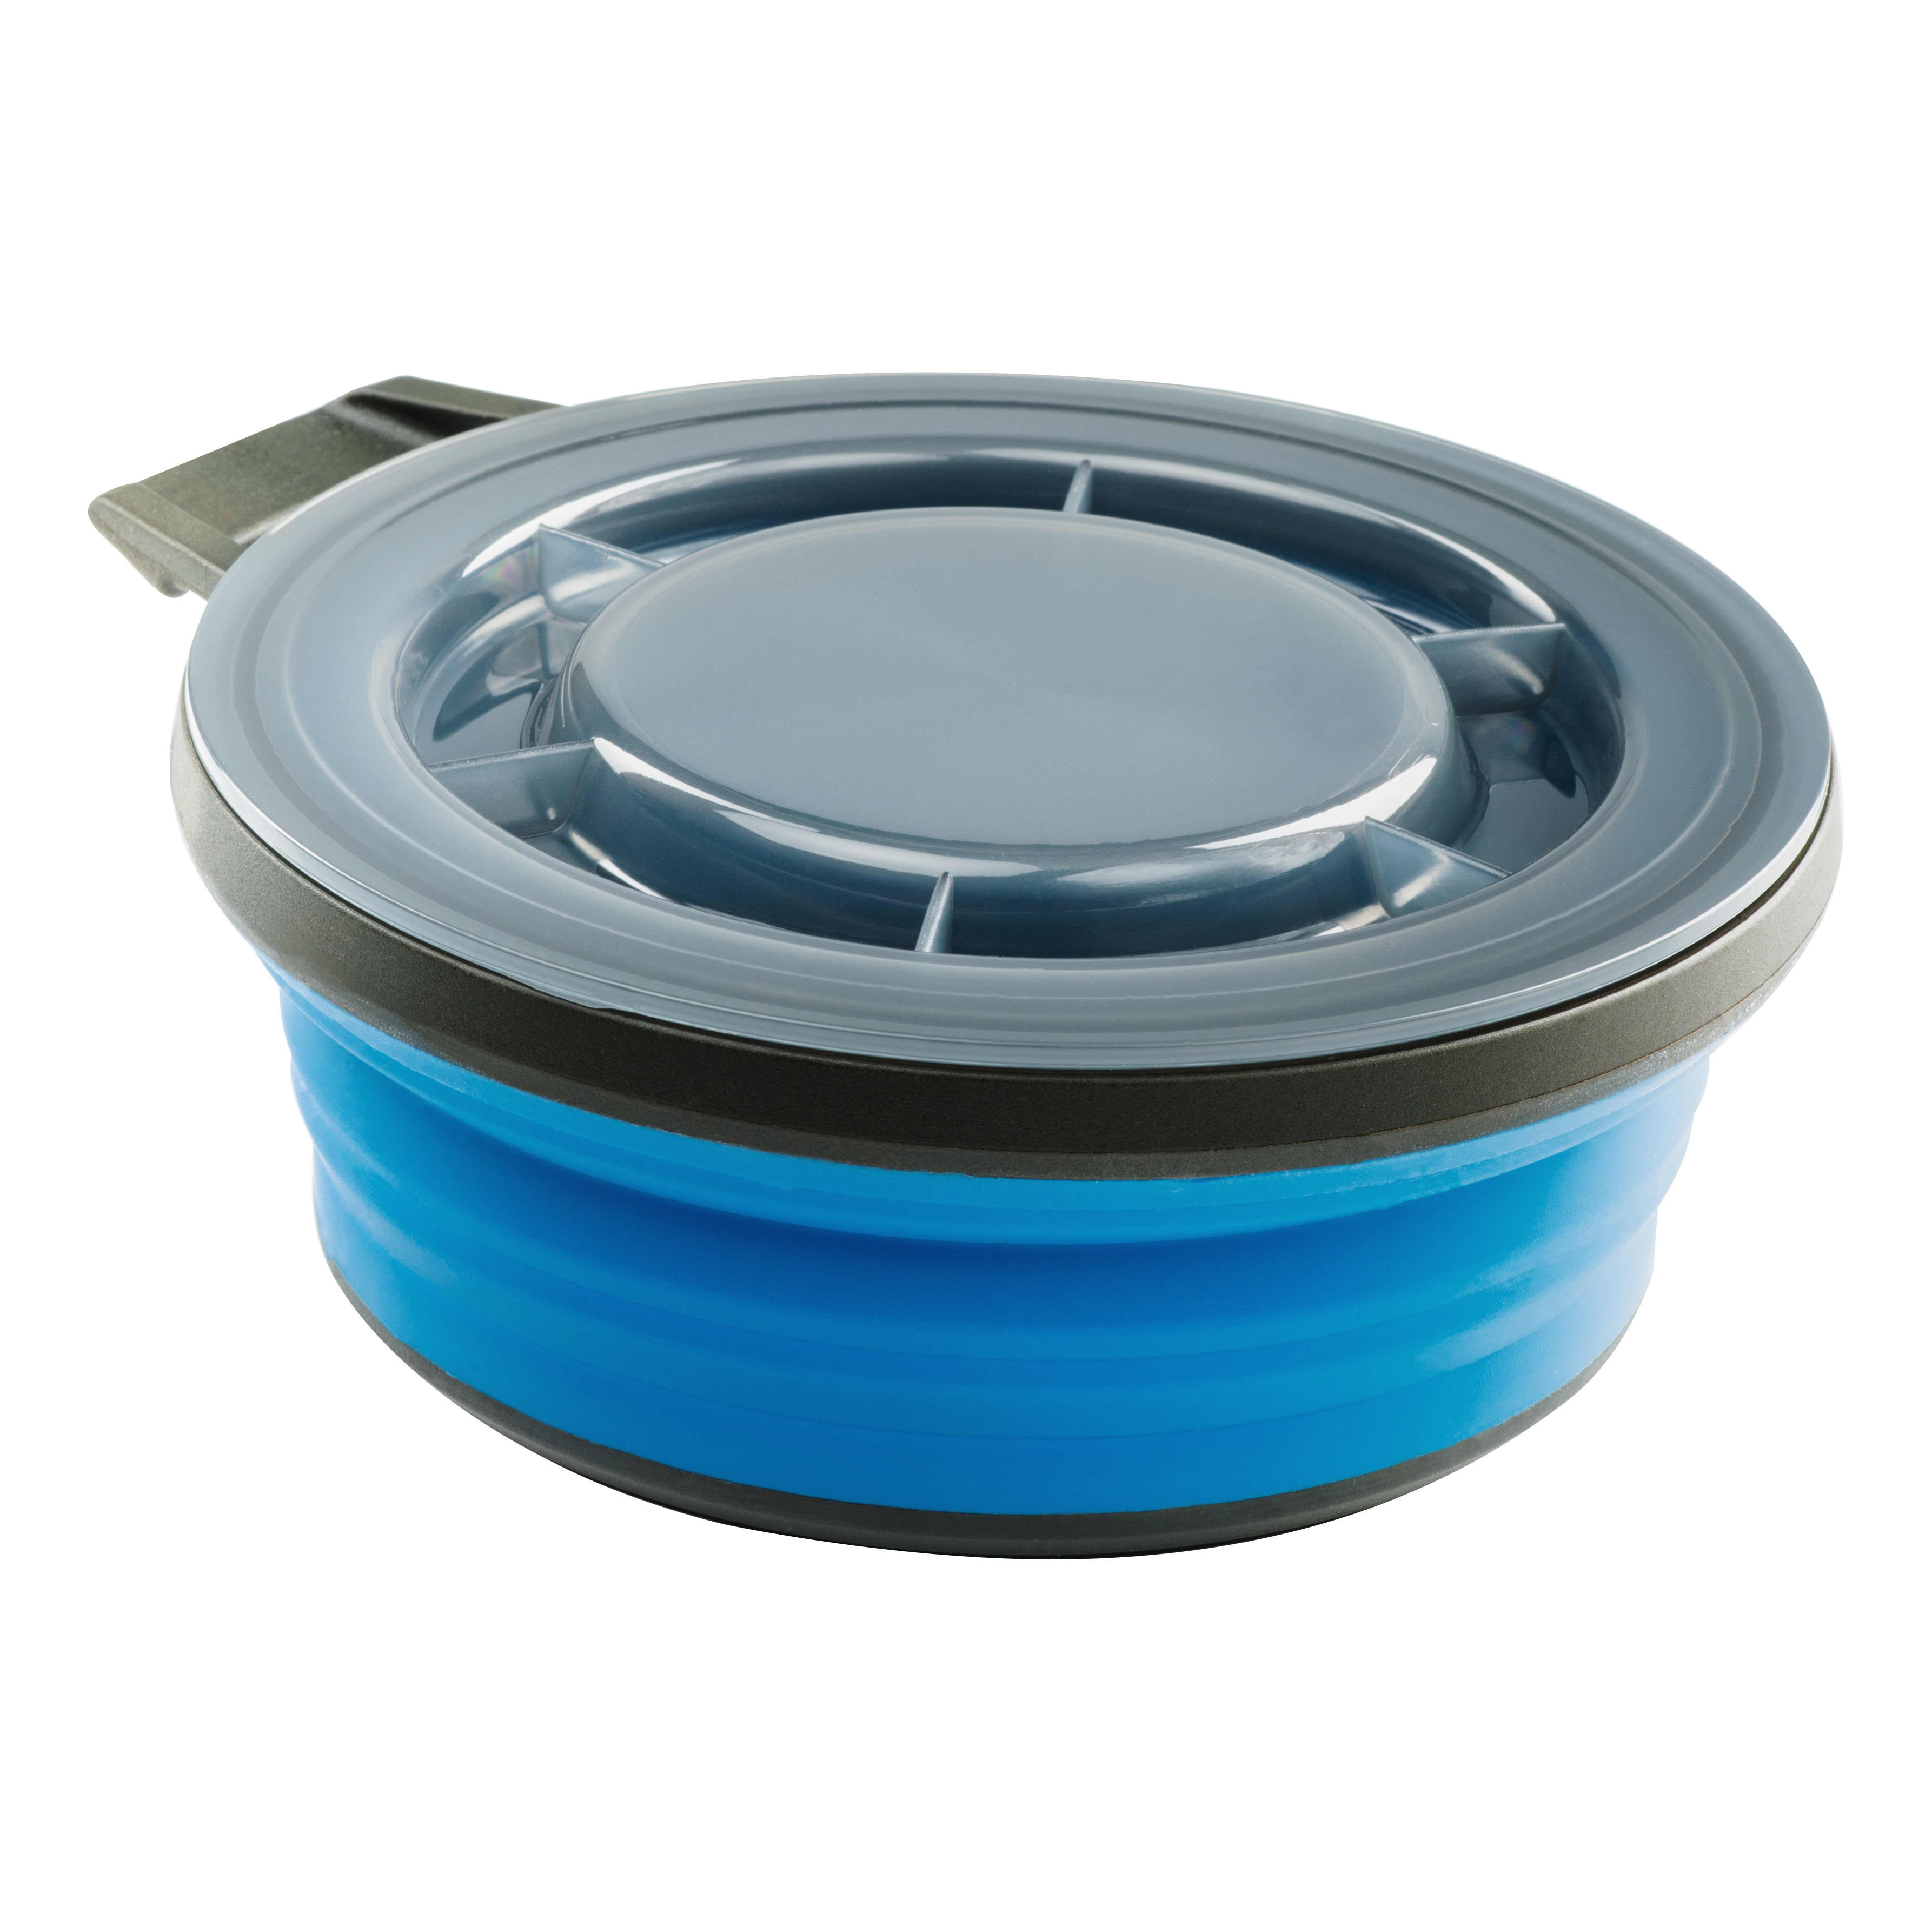 GSI Outdoors Escape Bowl with Lid - Blue